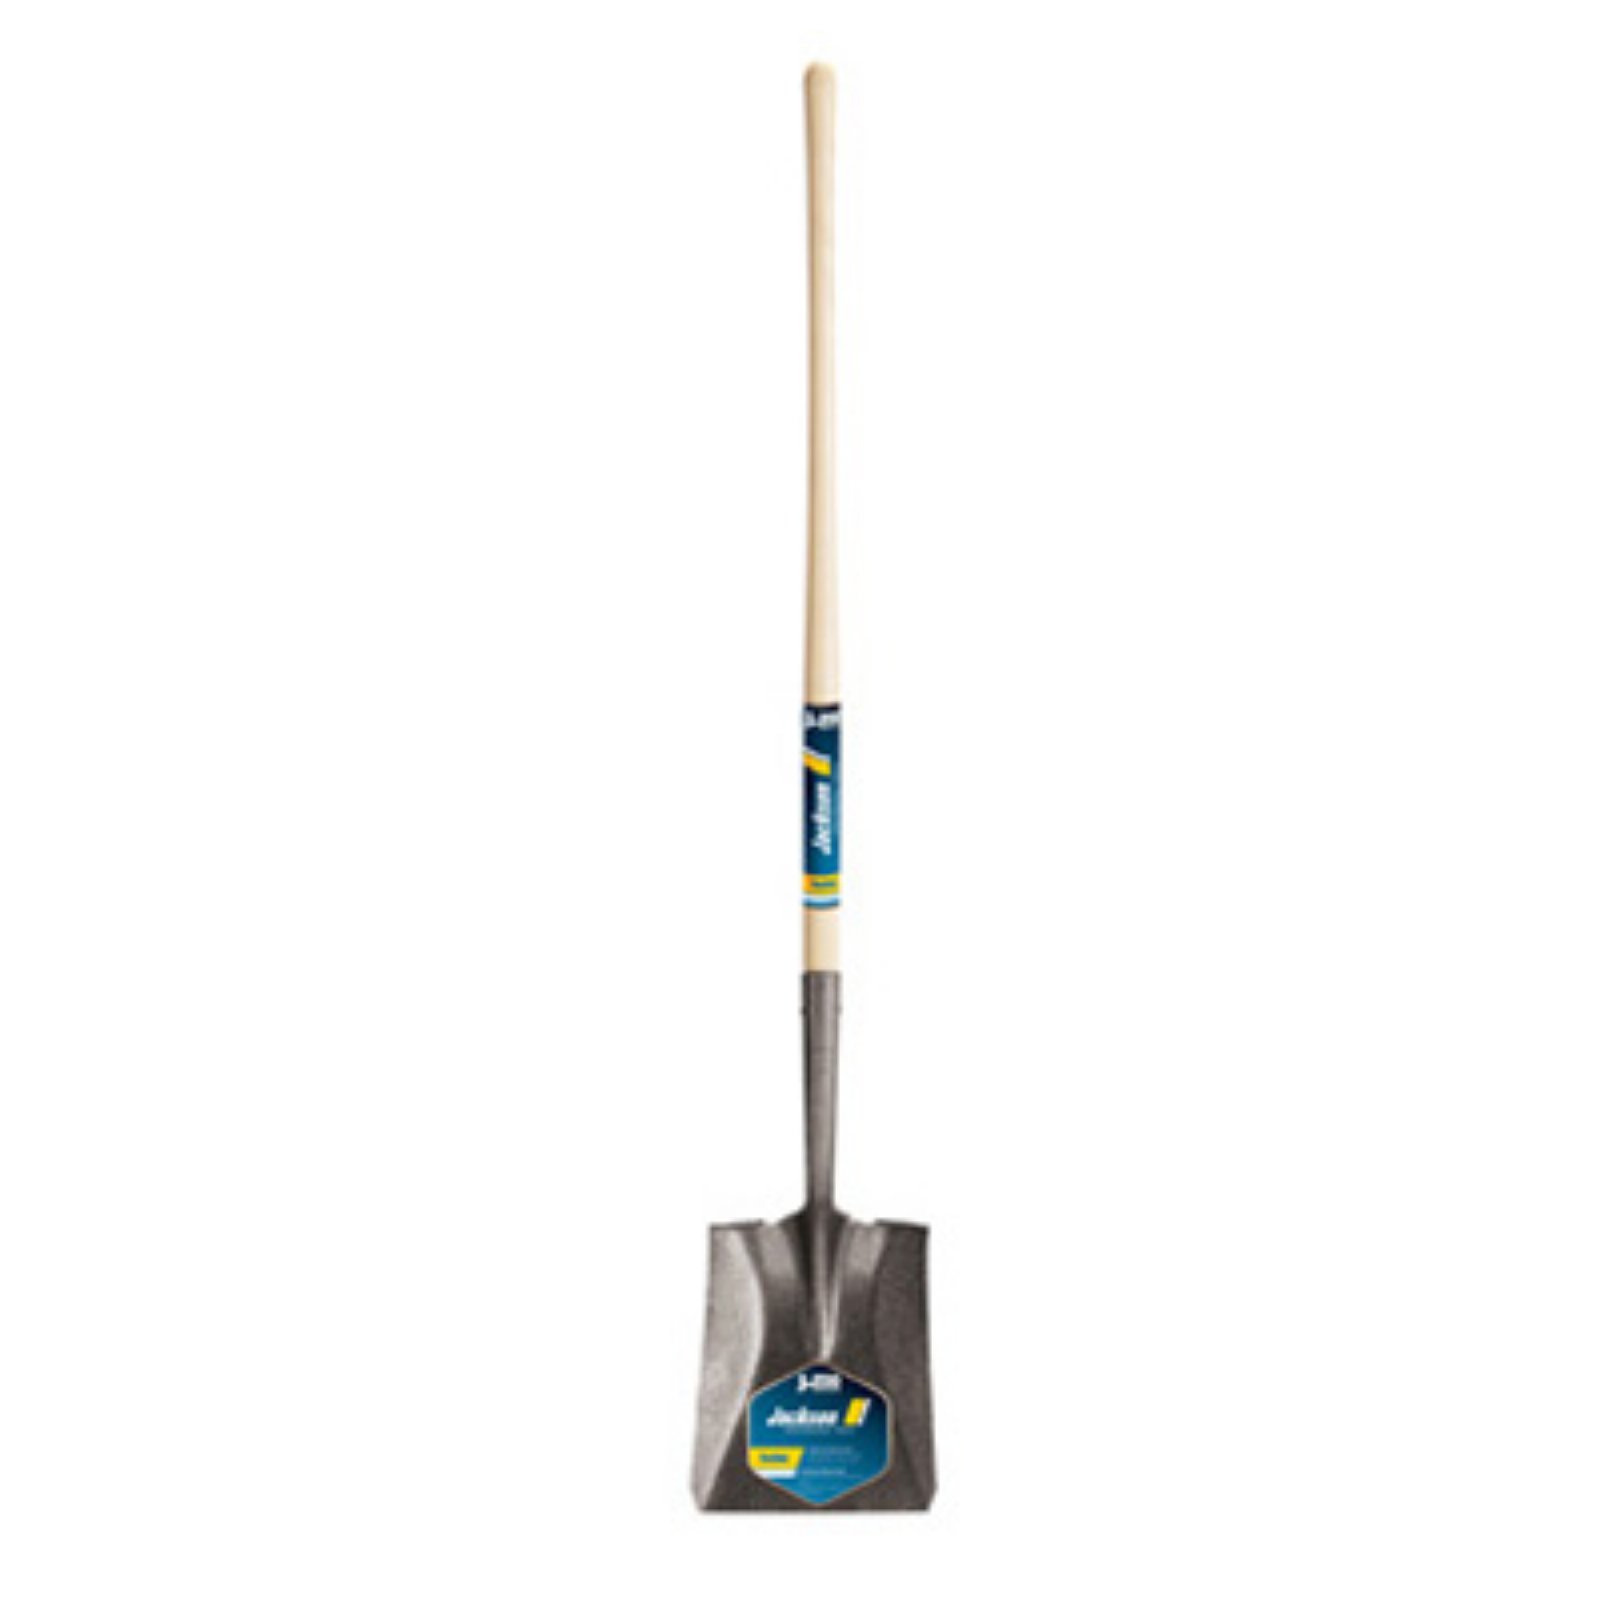 Ames True Temper Jackson 48 in. Handle Square Point Shovel - image 1 of 2